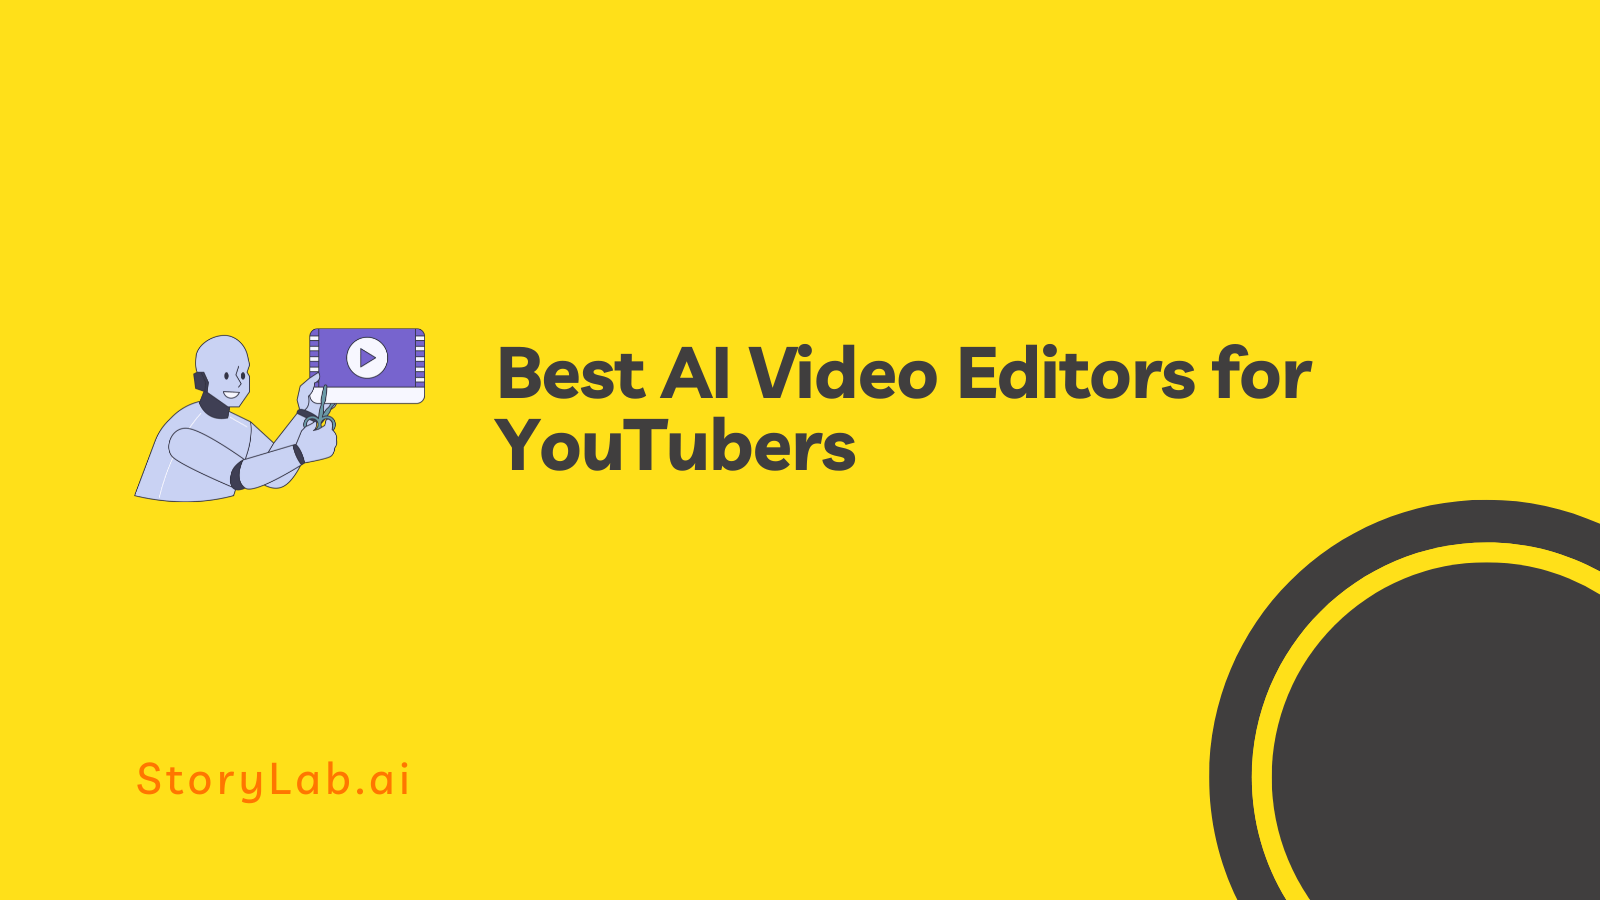 Best AI Video Editors for YouTubers